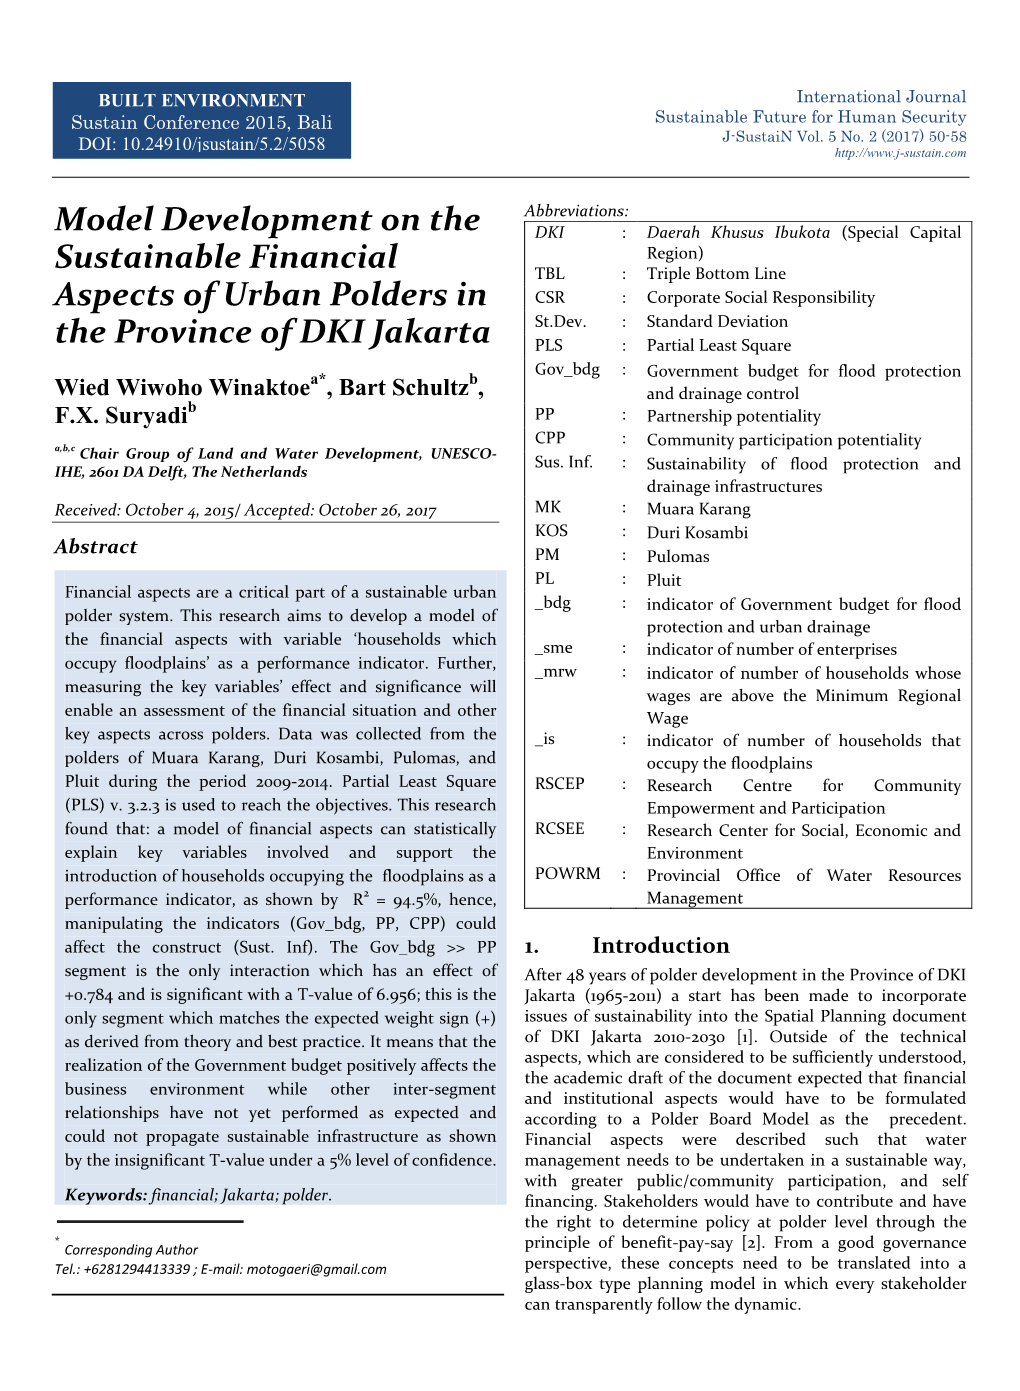 Model Development on the Sustainable Financial Aspects of Urban Polders in the Province of DKI Jakarta